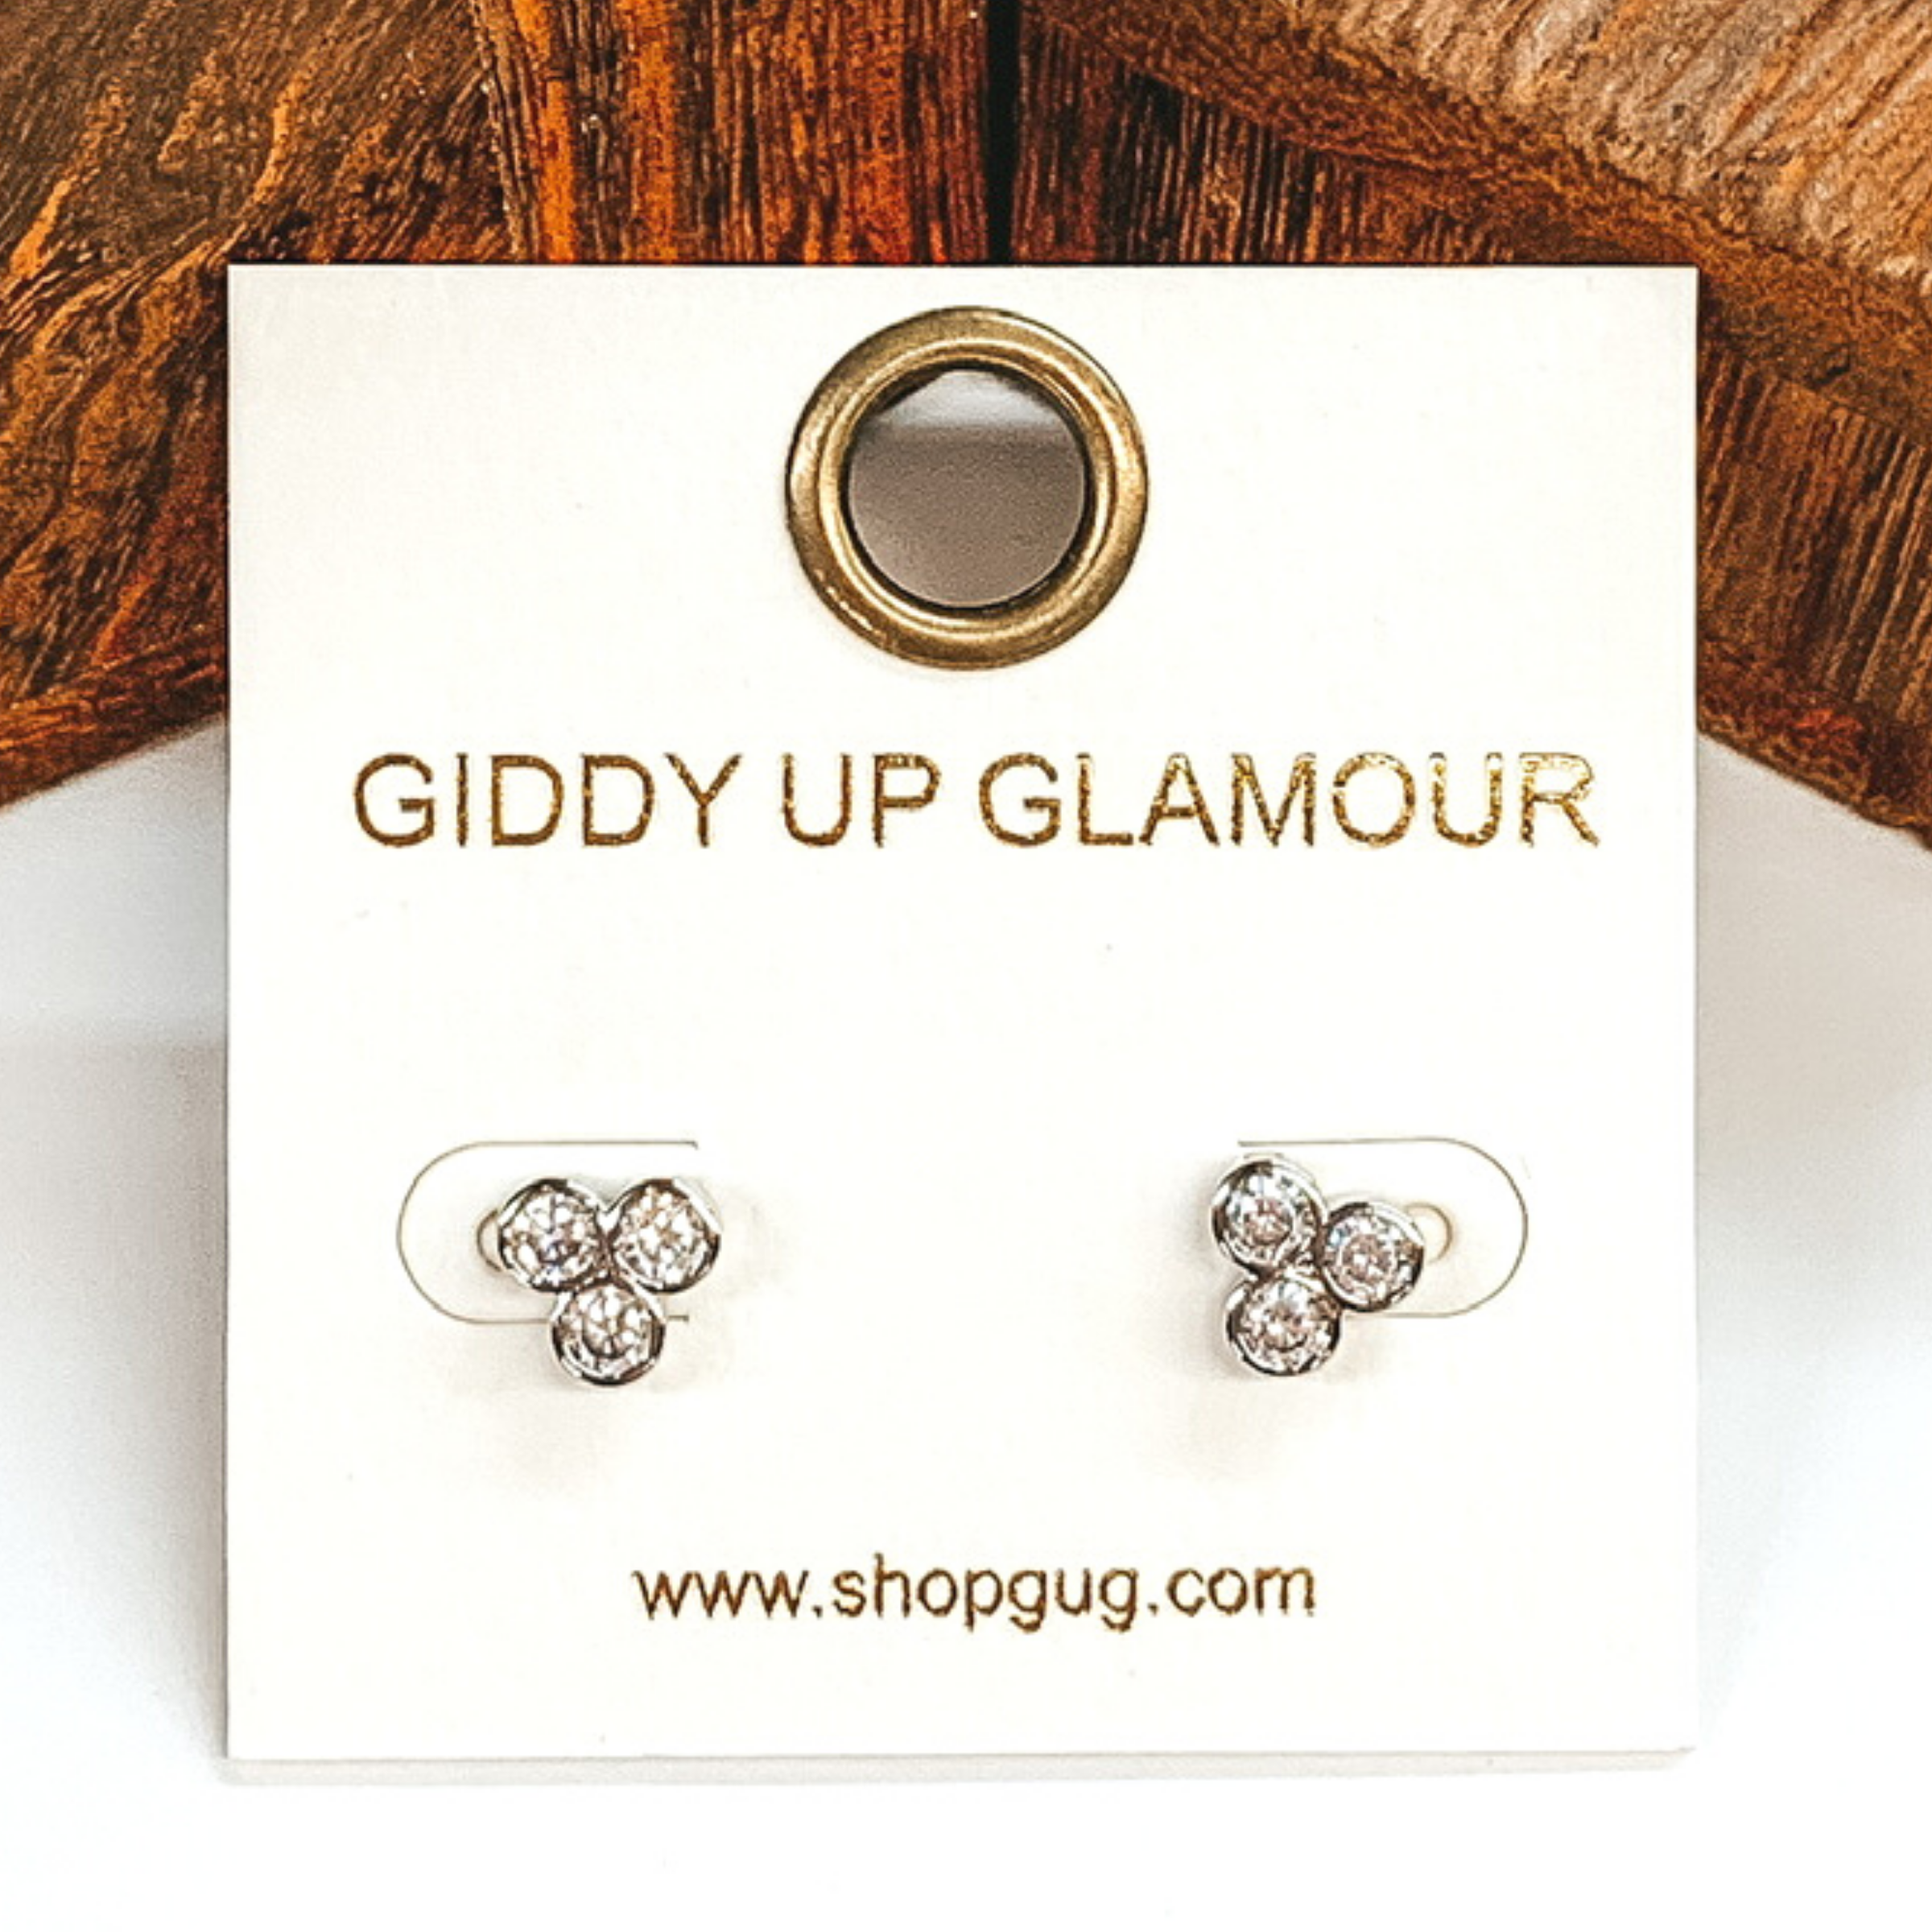 Small, silver circle cluster crystal stud earrings. These earrings are pictured on a white earrings card on a white and brown background.